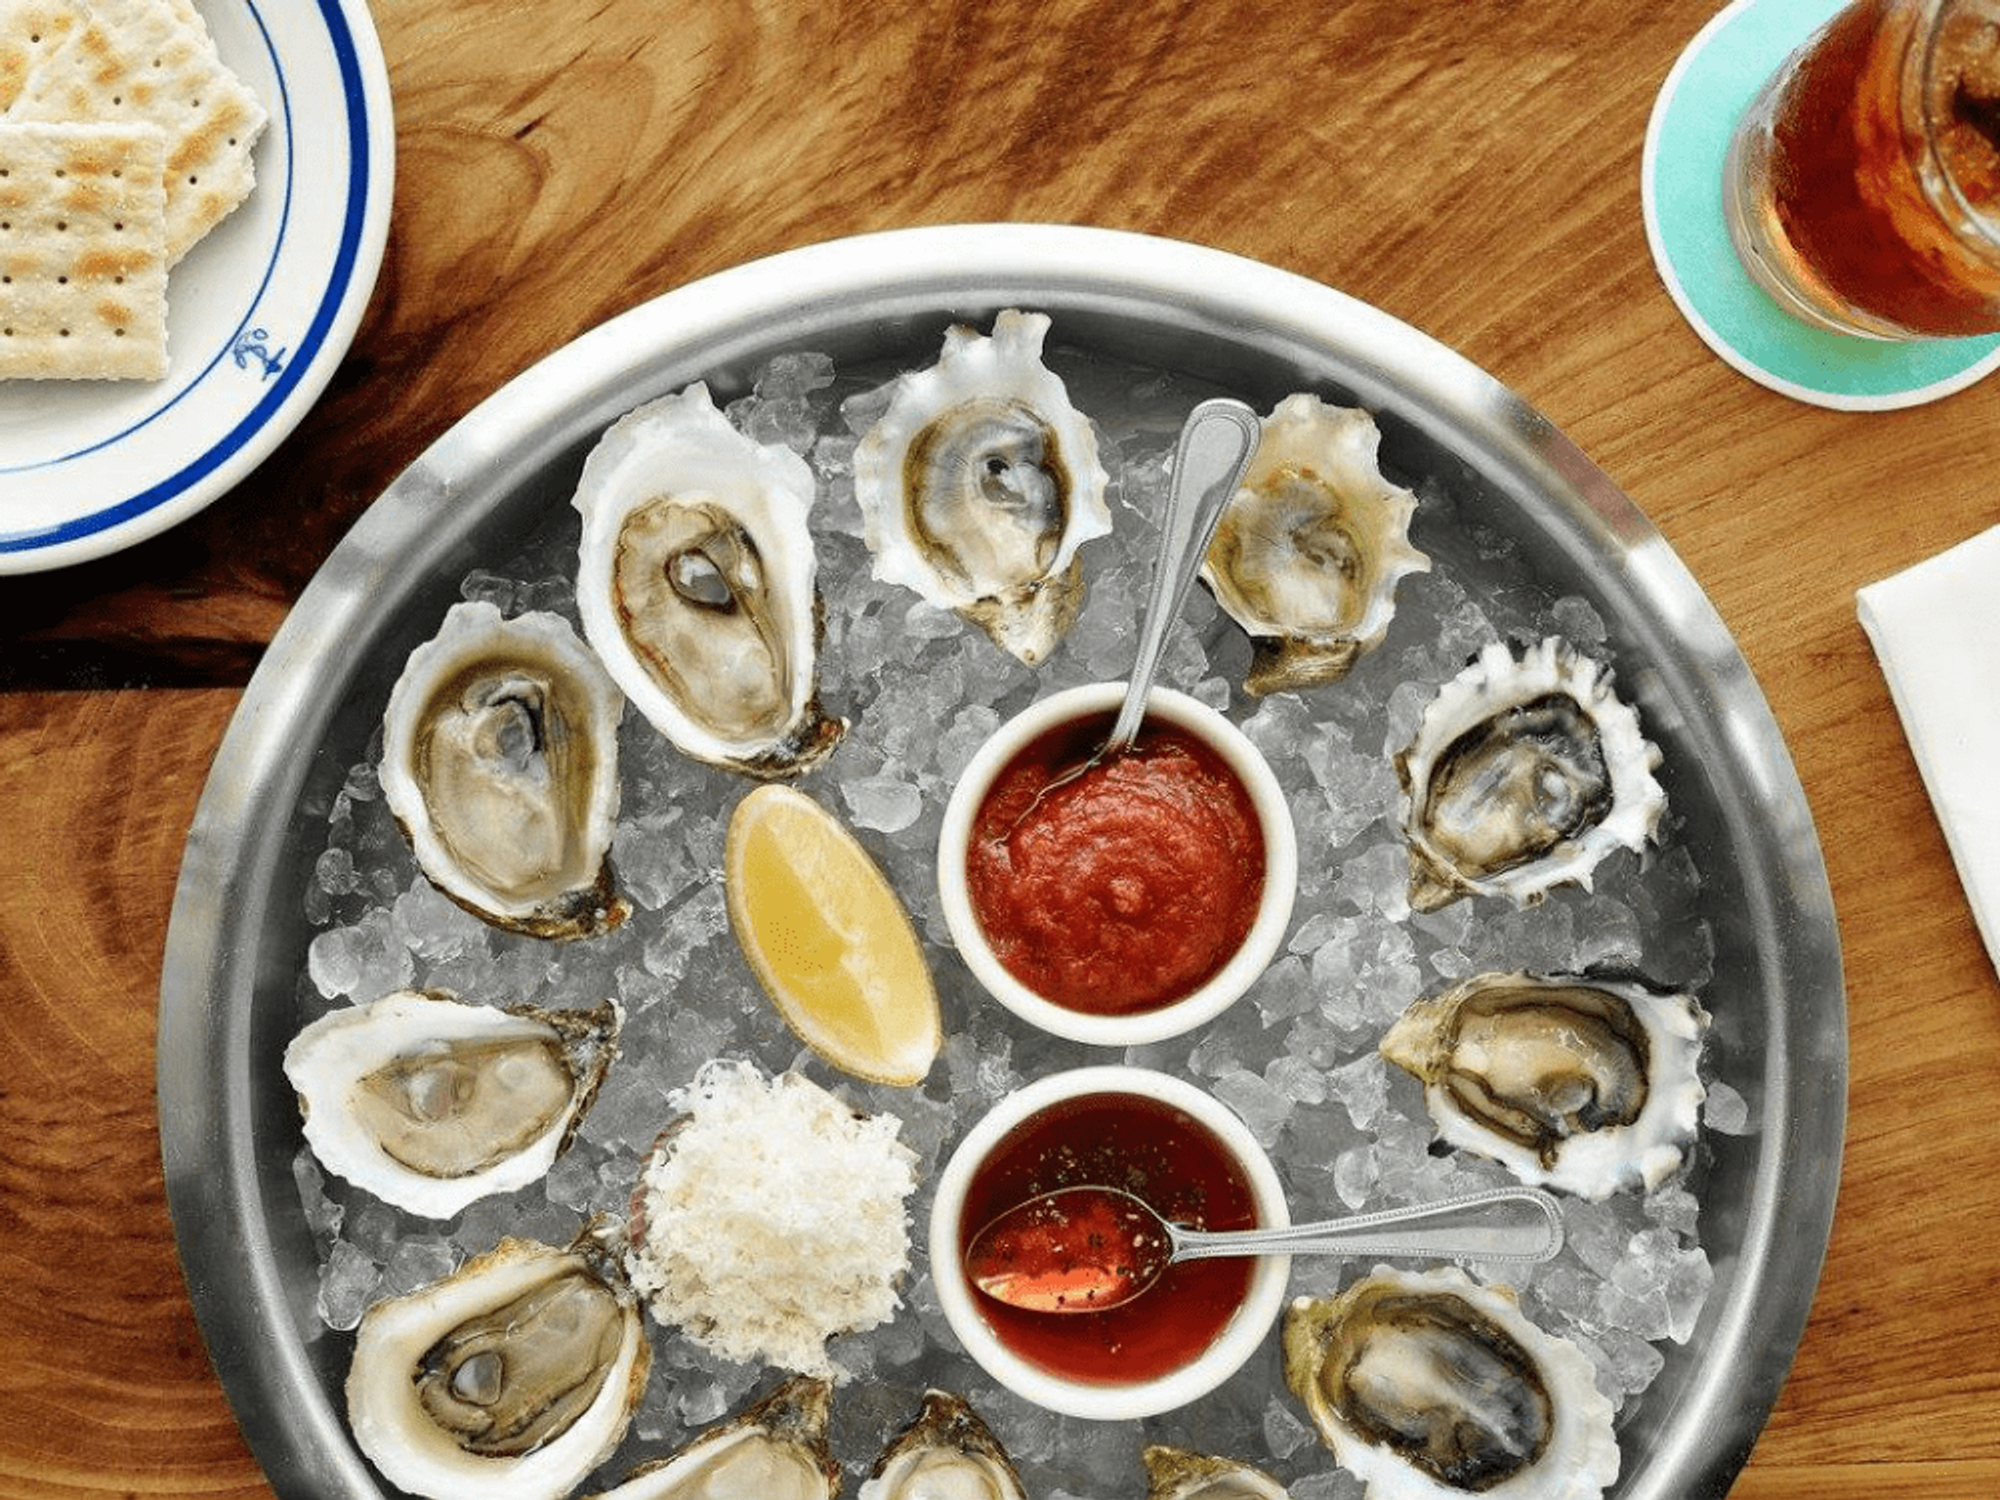 Clark's serves some of the freshest oysters in town.